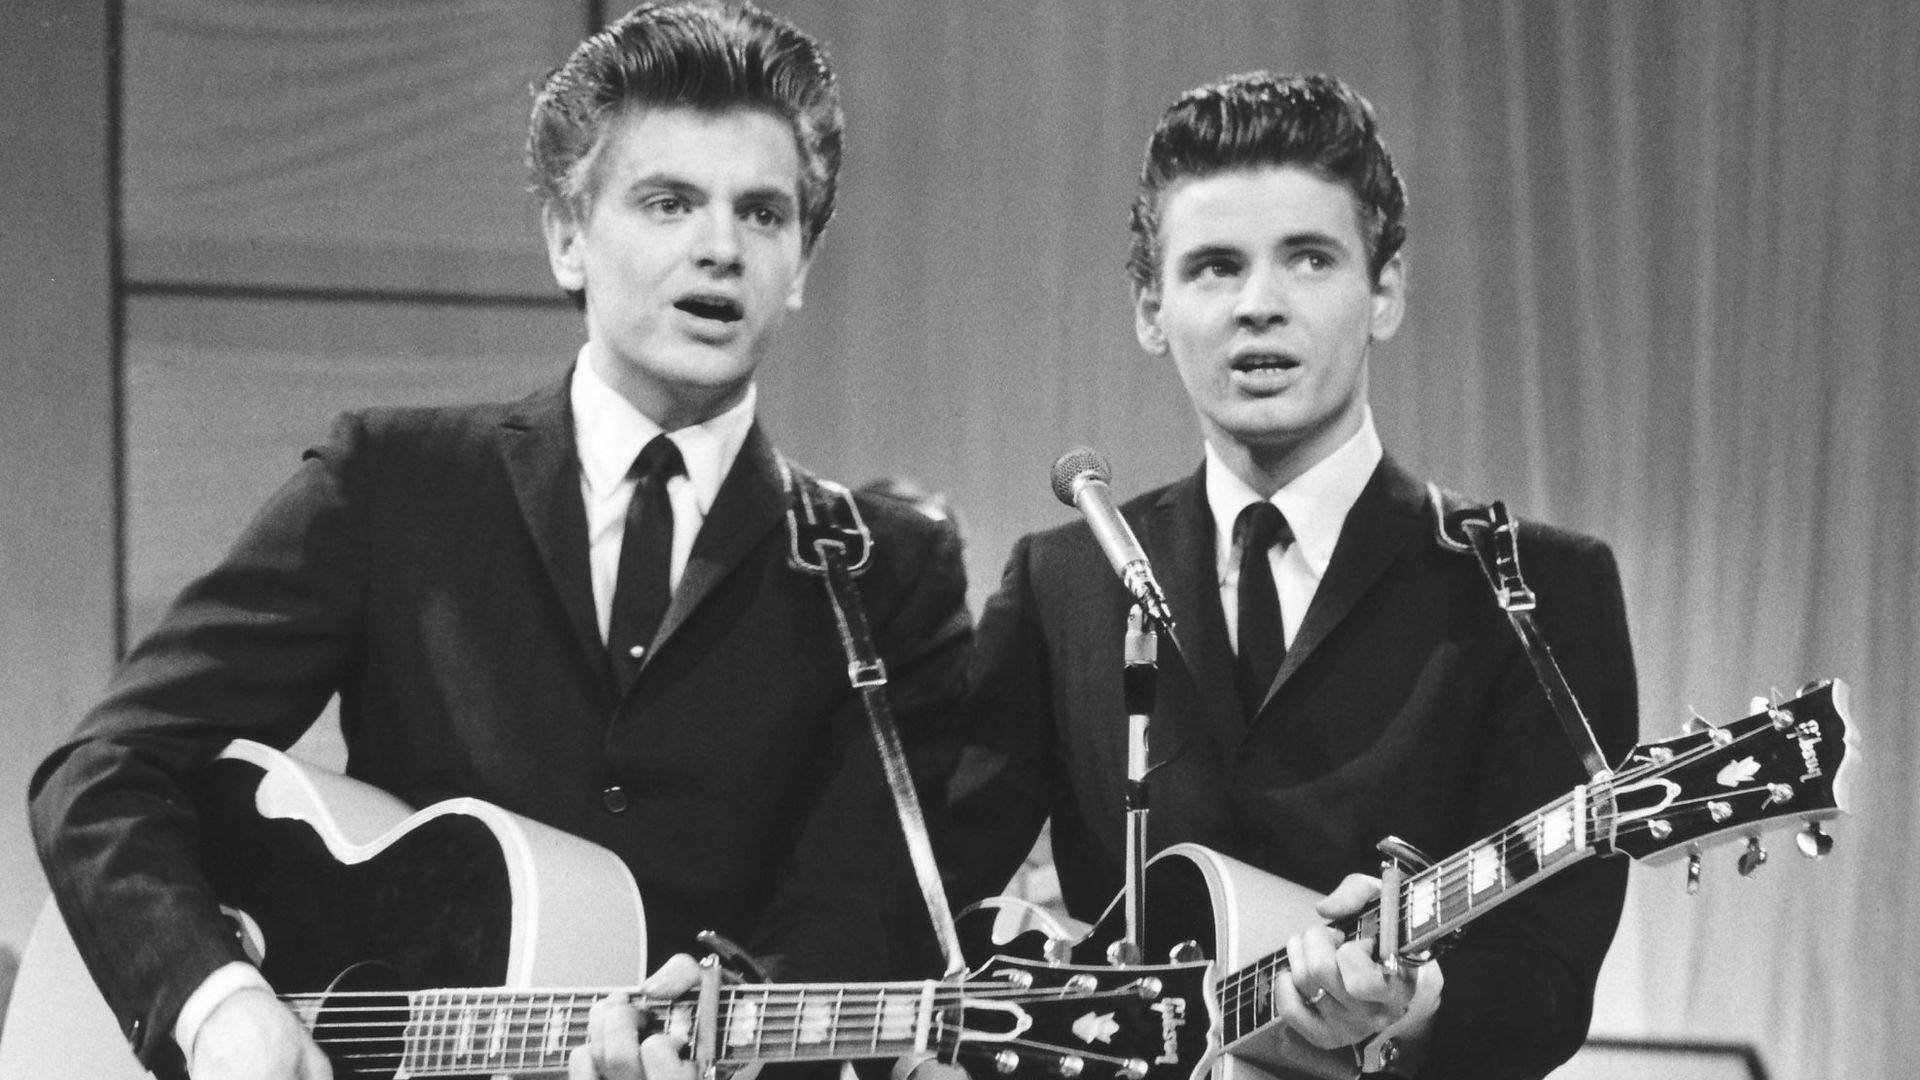 Everly Brothers Performing in 1960 Wallpaper